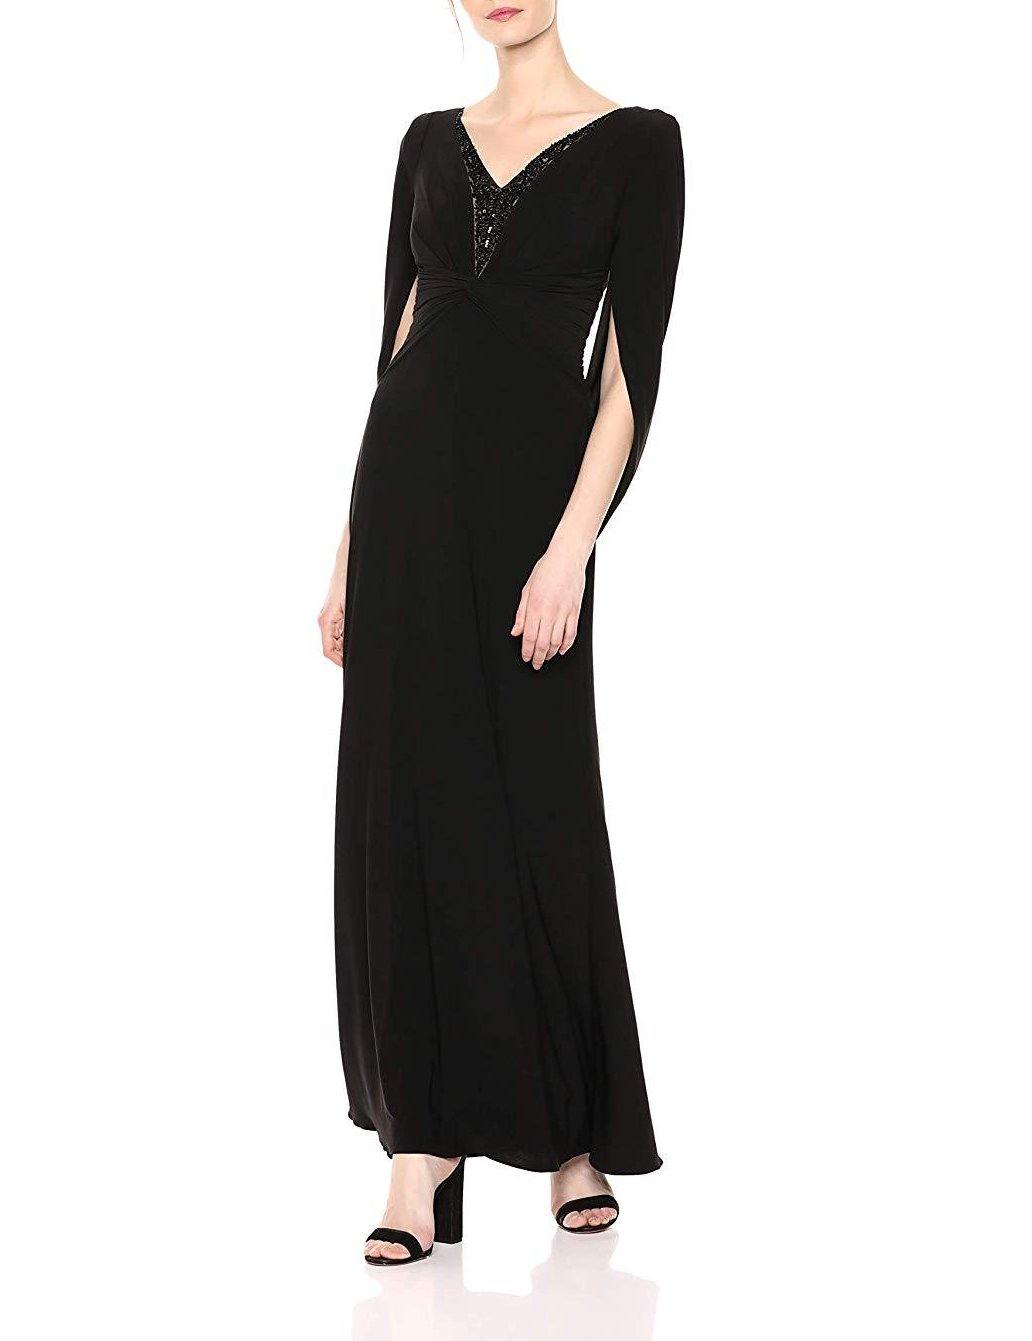 Adrianna Papell Long V-Neck Crossed Front Formal Jersey Dress - The Dress Outlet Adrianna Papell